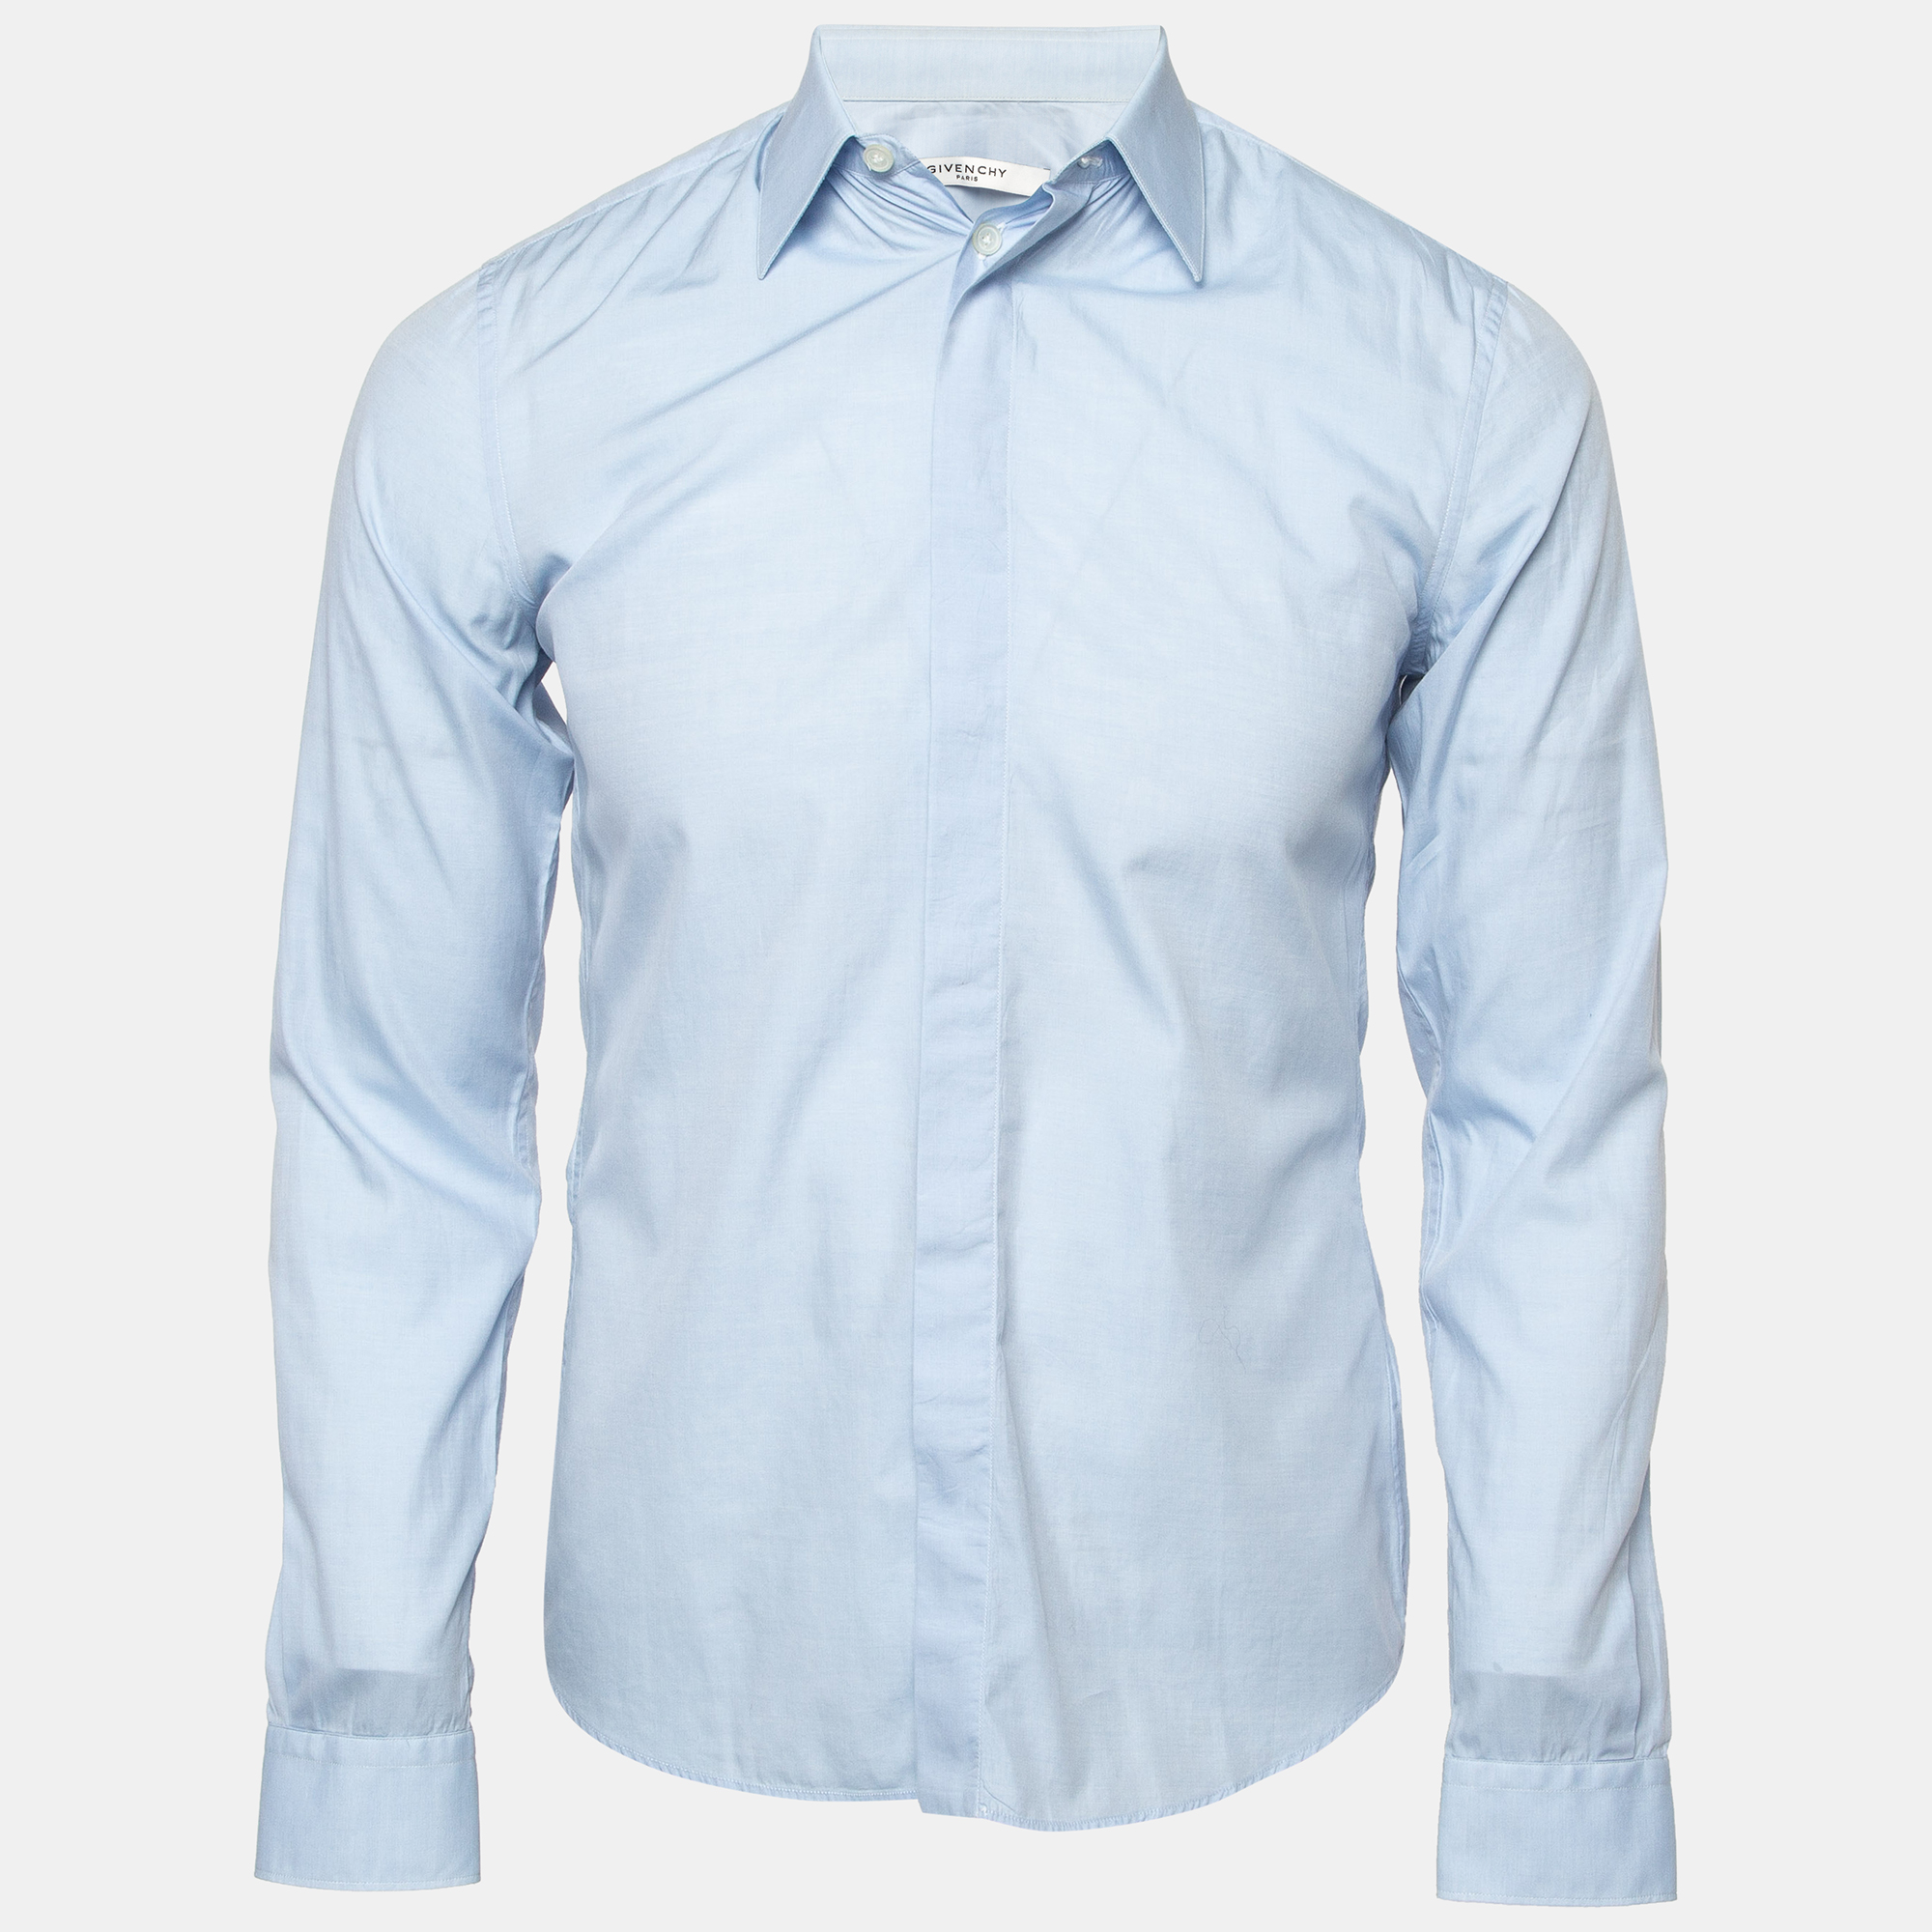 Givenchy blue cotton long sleeve shirt s